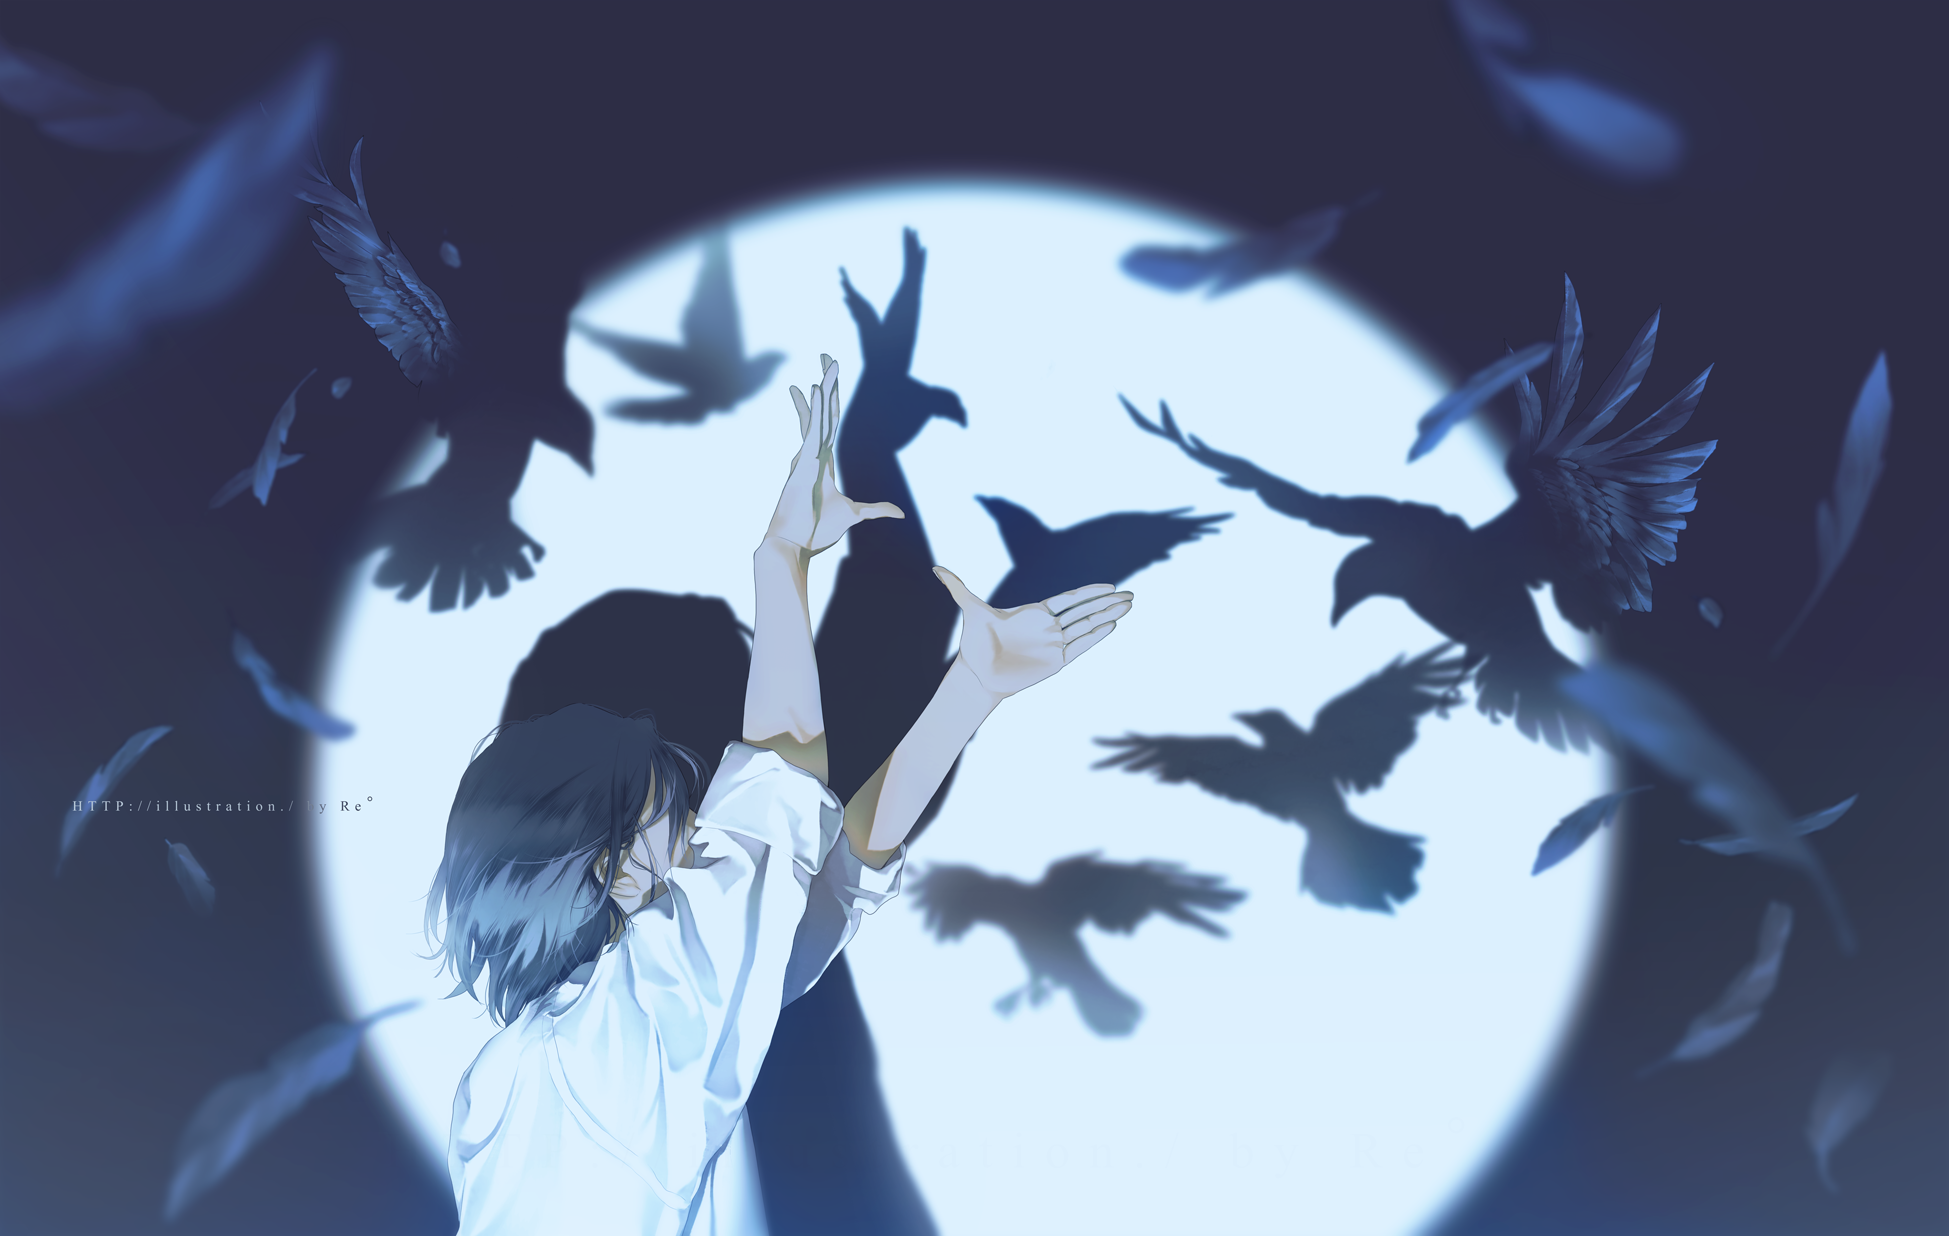 Anime Girl Surrounded By Other Girls Wearing Crow Background, Askew Picture  Background Image And Wallpaper for Free Download